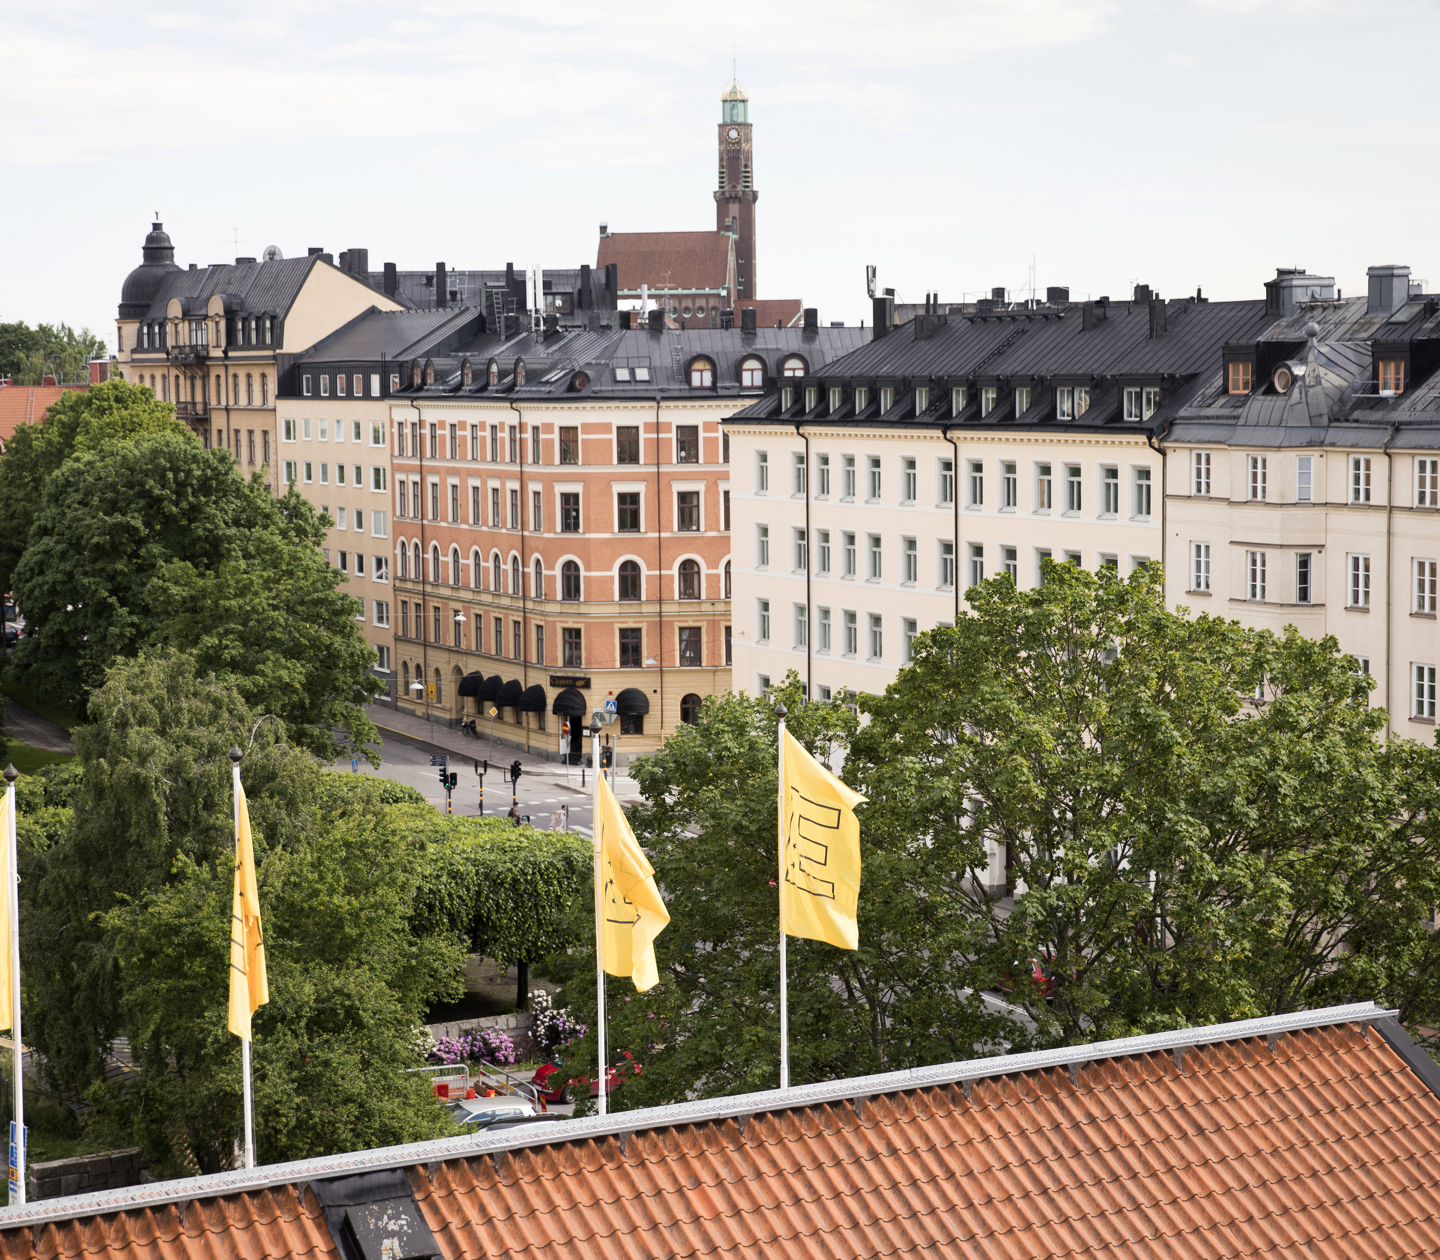 Roof of hotel and yellow Elite flags with trees in front